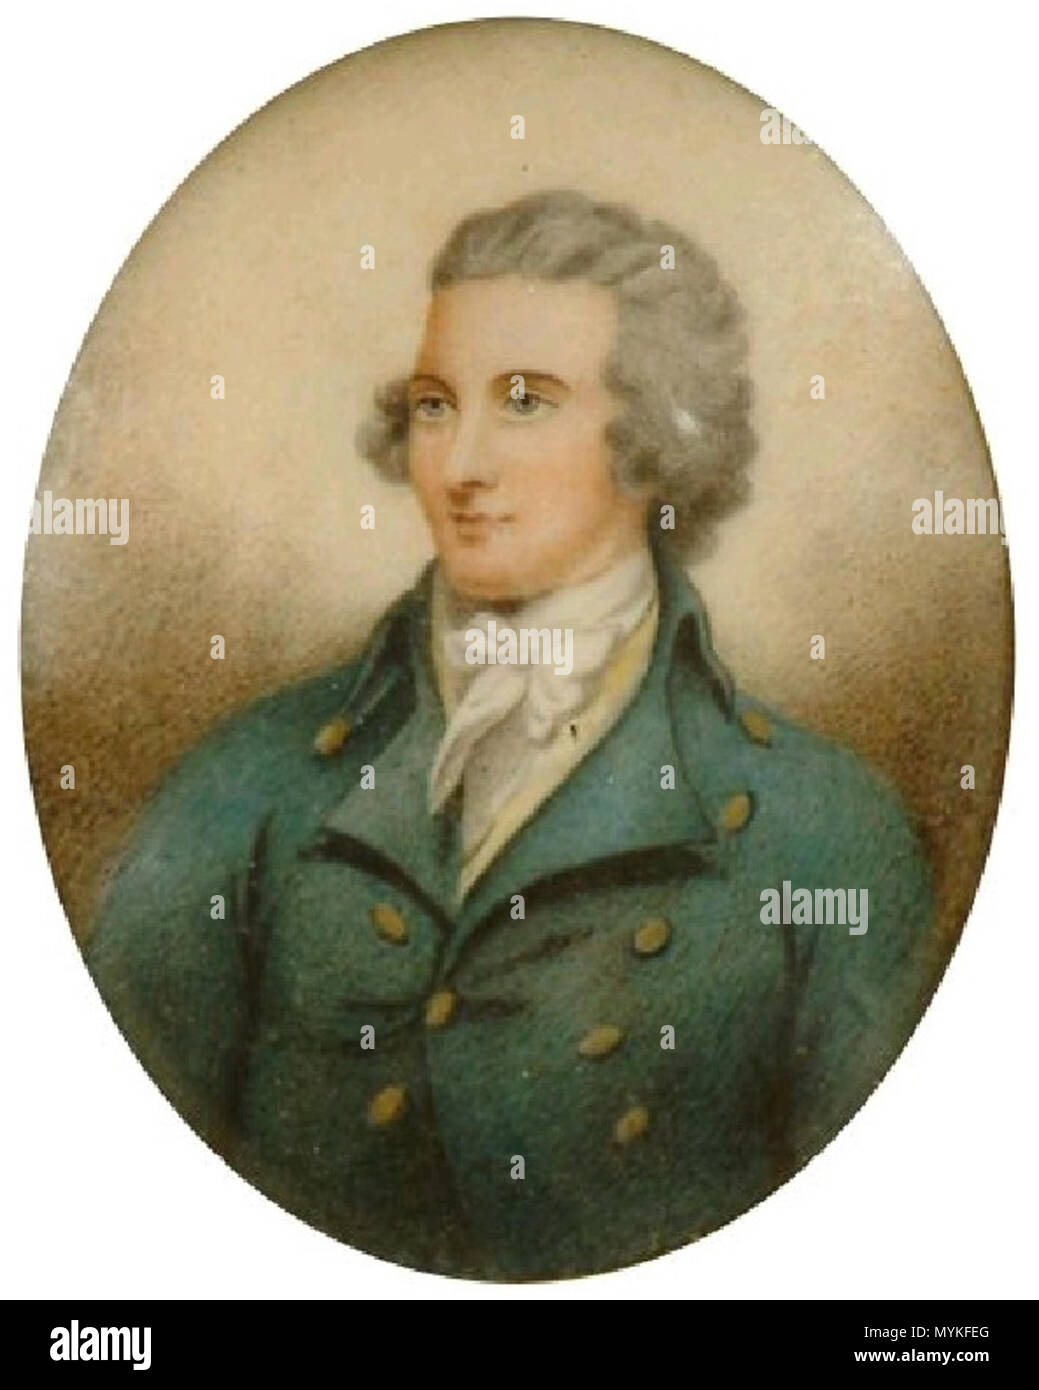 . Miniature portrait of Mungo Park, bust-length with powdered hair, white cravat and buttoned jacket on mica, oval 9.5 x 7.5cm. Footnote: Mungo Park, a Scottish surgeon and explorer, was sent out by the 'Association for Promoting the Discovery of the Interior of Africa' to discover the course of the River Niger. Having achieved a degree of fame from his first trip, carried out alone and on foot, he returned to Africa with a party of 40 Europeans, all of whom lost their lives in the expedition. . This file is lacking author information. 377 Mungo Park miniature Stock Photo